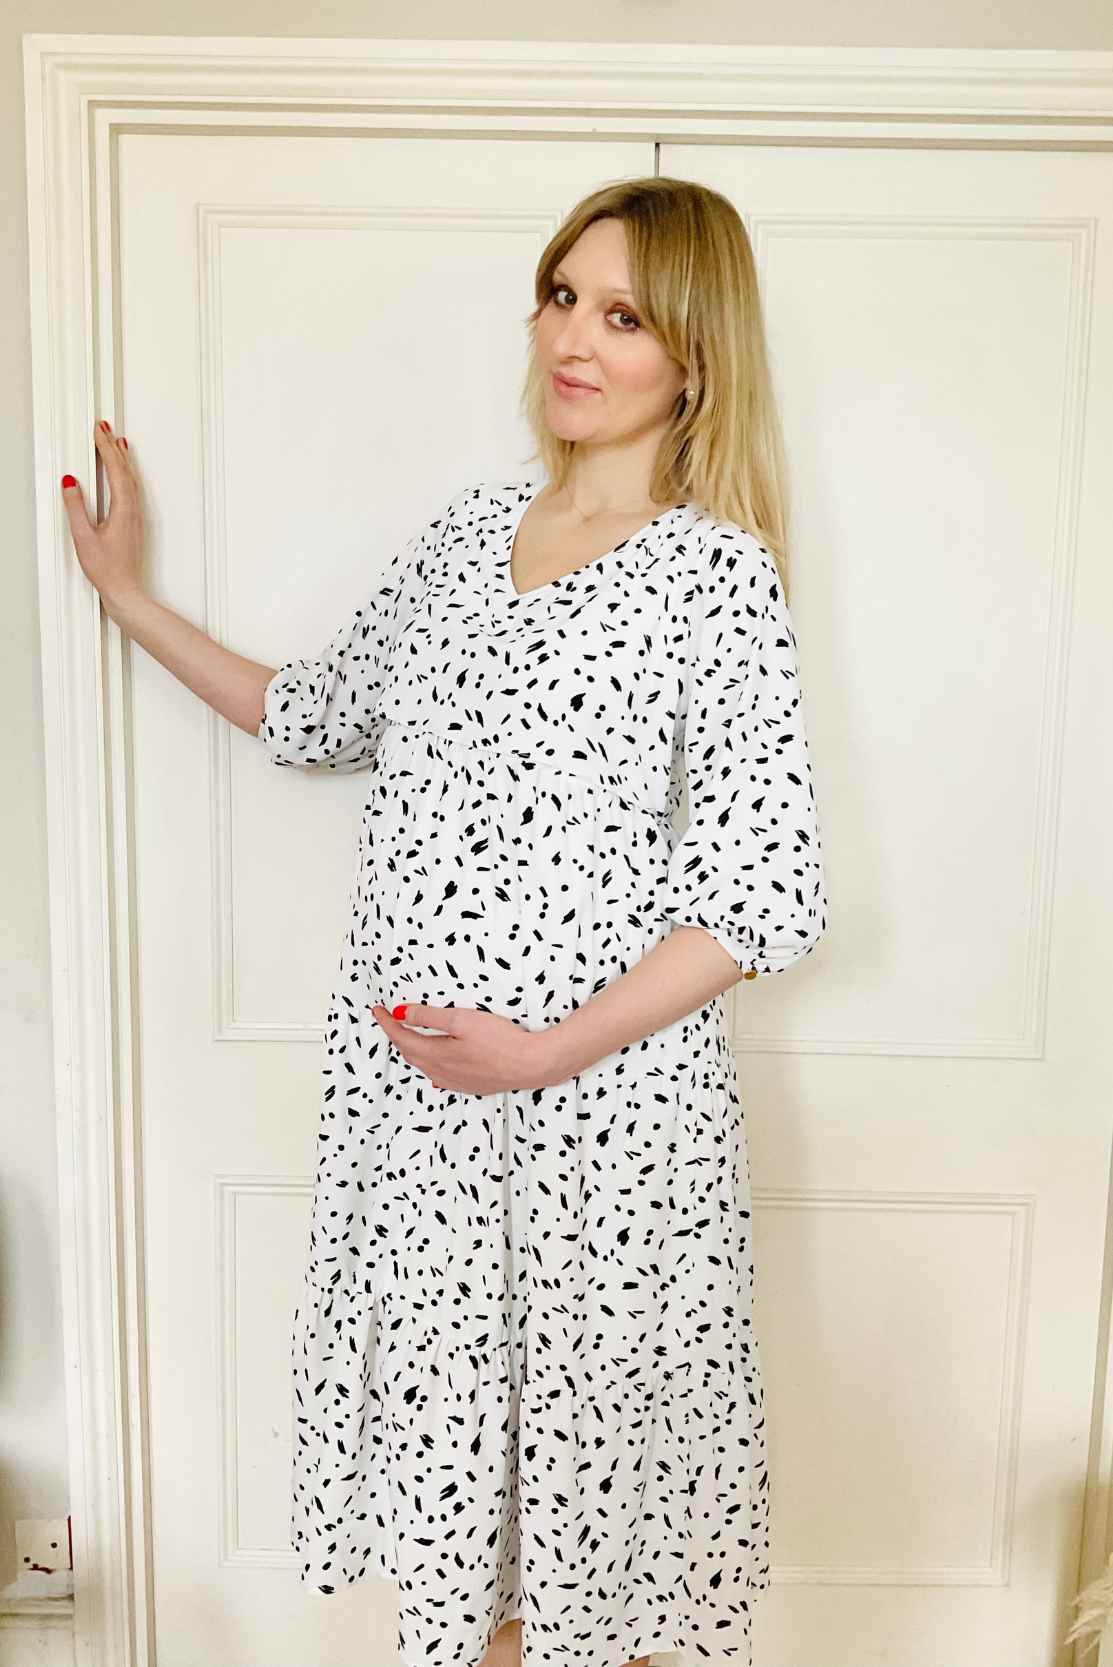 This bump- and breastfeeding-friendly dress has a boho fit, with billowy sleeves and a flattering V-neckline. For pregnancy, the tiered design makes this a stylish maternity dress choice that is also so comfortable until full-term. Postpartum, the concealed zippers allow for convenient nursing.